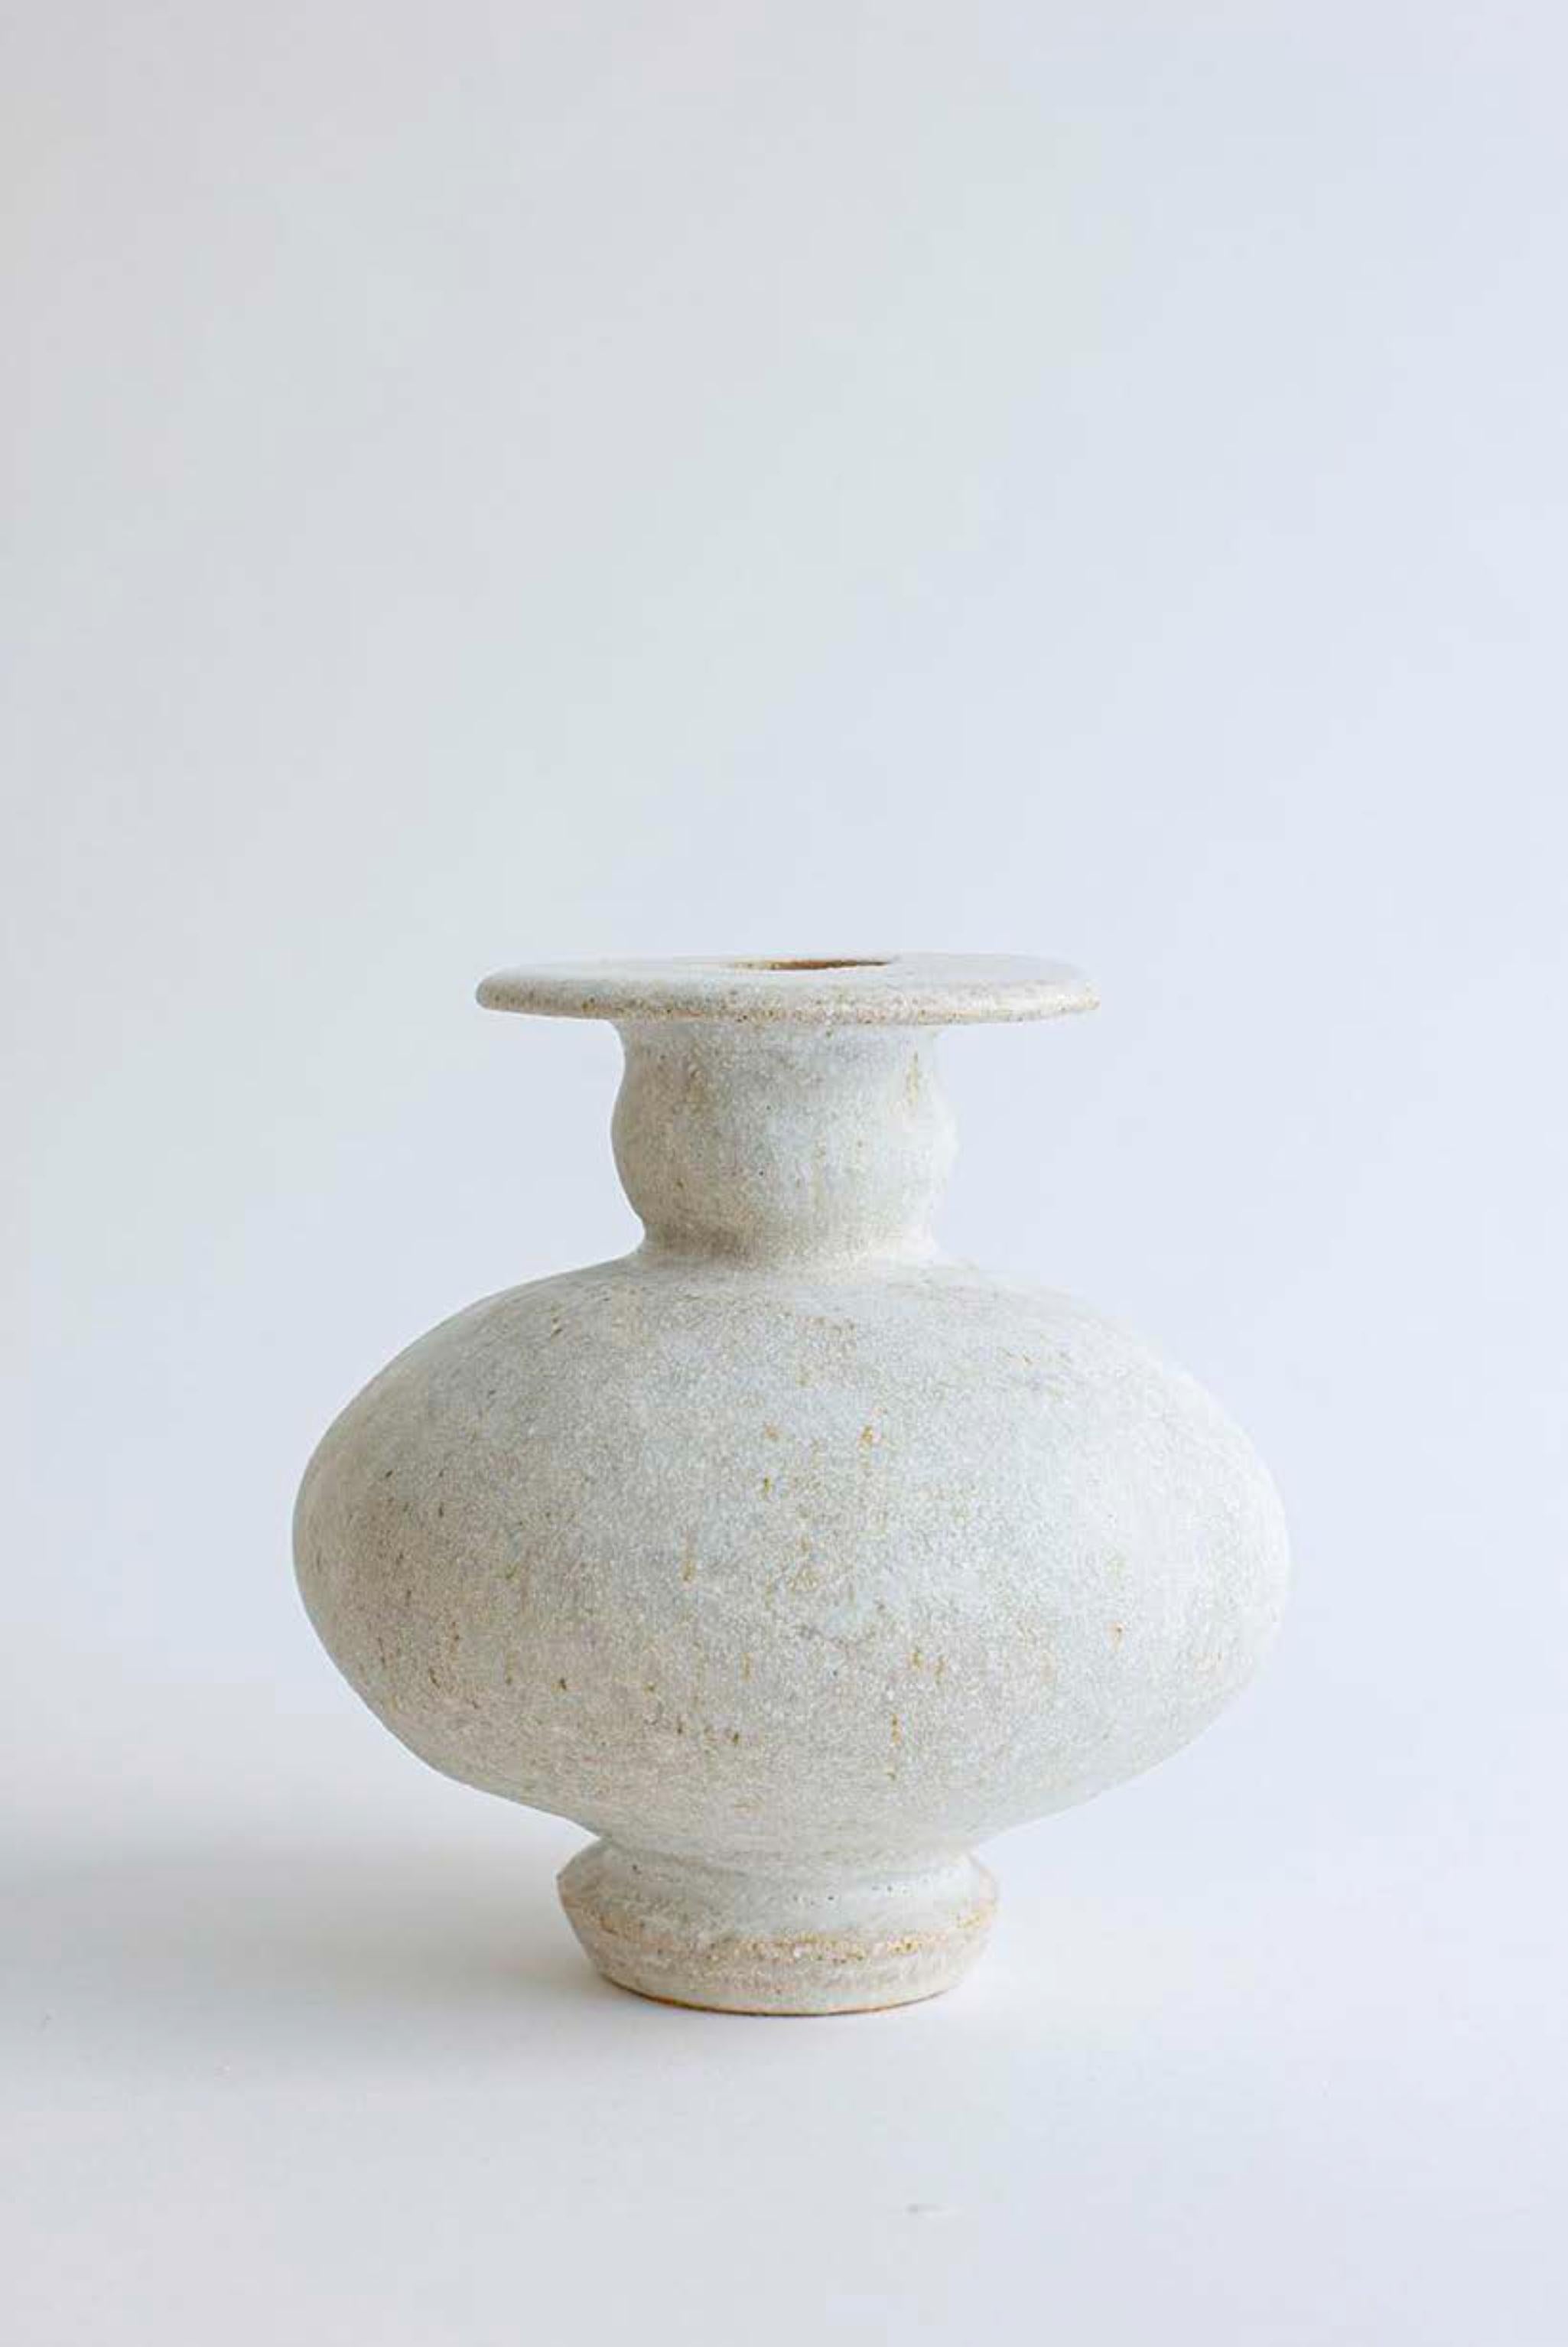 Unique Cálpide Blanco, hueso vase by Raquel Vidal and Pedro Paz
Dimensions: Ø 16 x 16 cm
Materials: Hand-sculpted glazed stoneware.

The Arq series emerged from our own past production. Drawing its inspiration from the field of archaeology, it